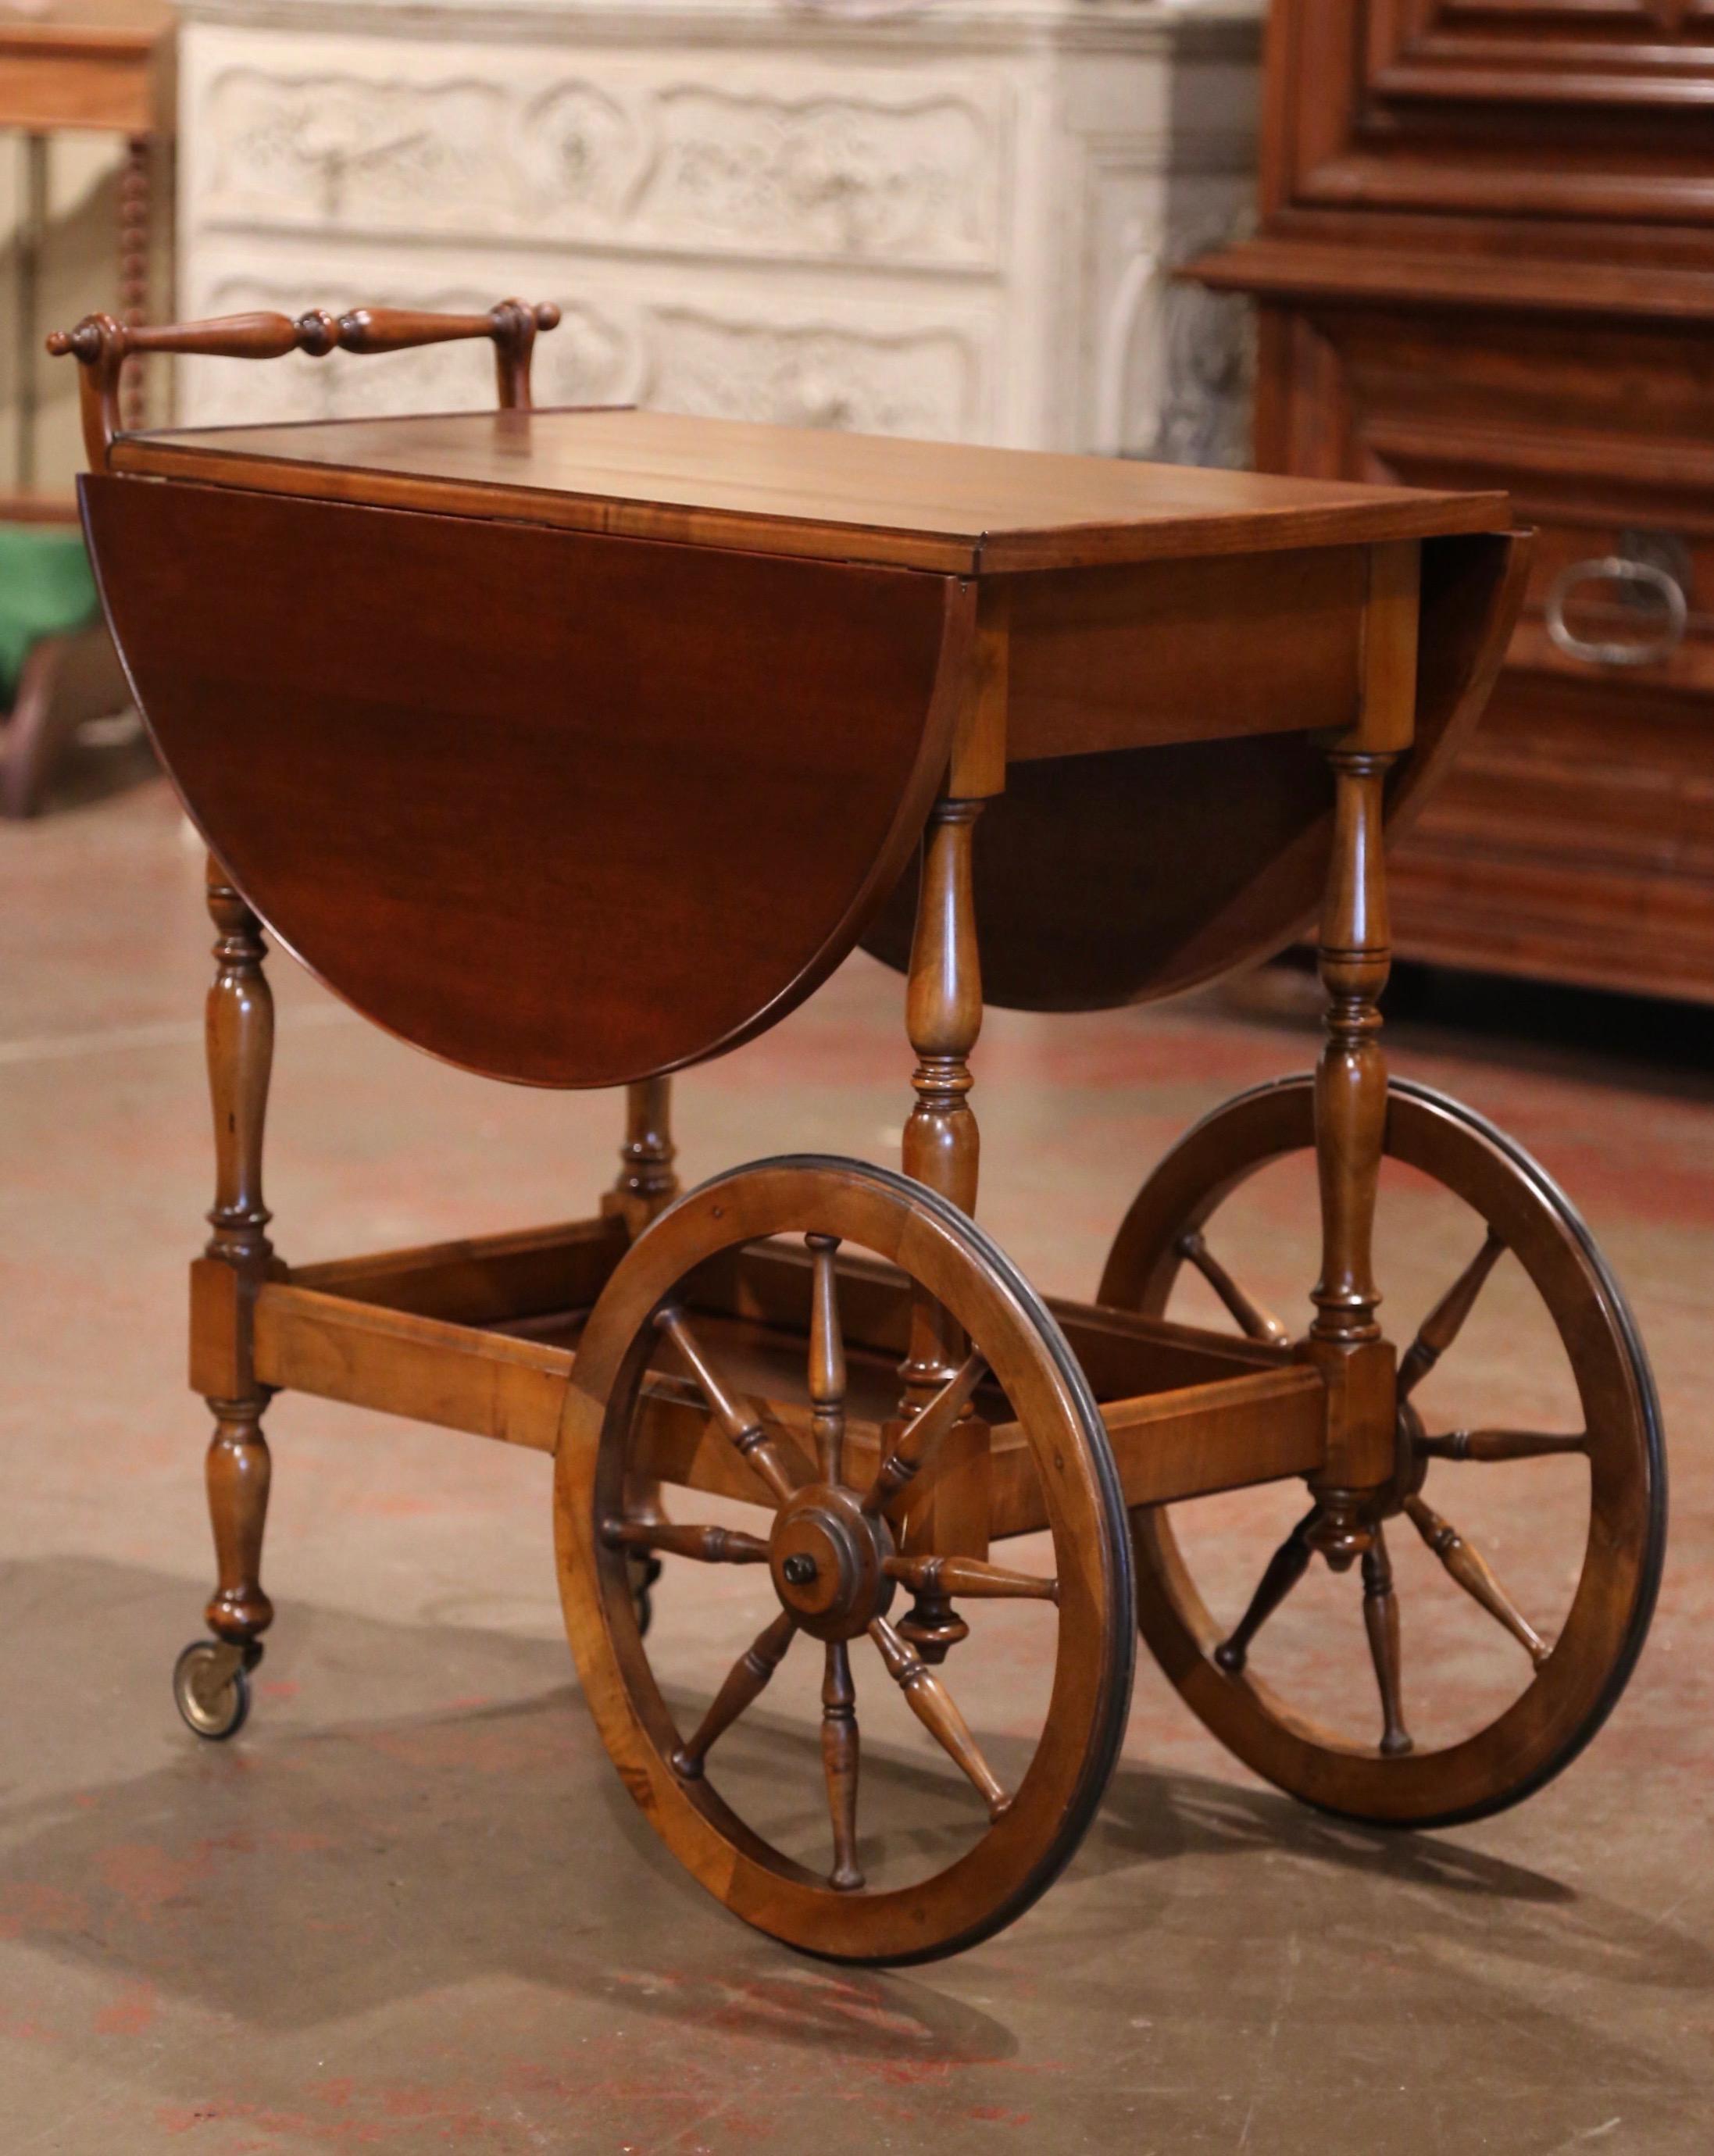 This elegant fruitwood drop-leaf cart was created in France, circa 1980. The cart sits on two large spoked front wheels with rubber, and smaller rear wheels. The two decks are connected with four turned spindles, and is embellished with a decorative